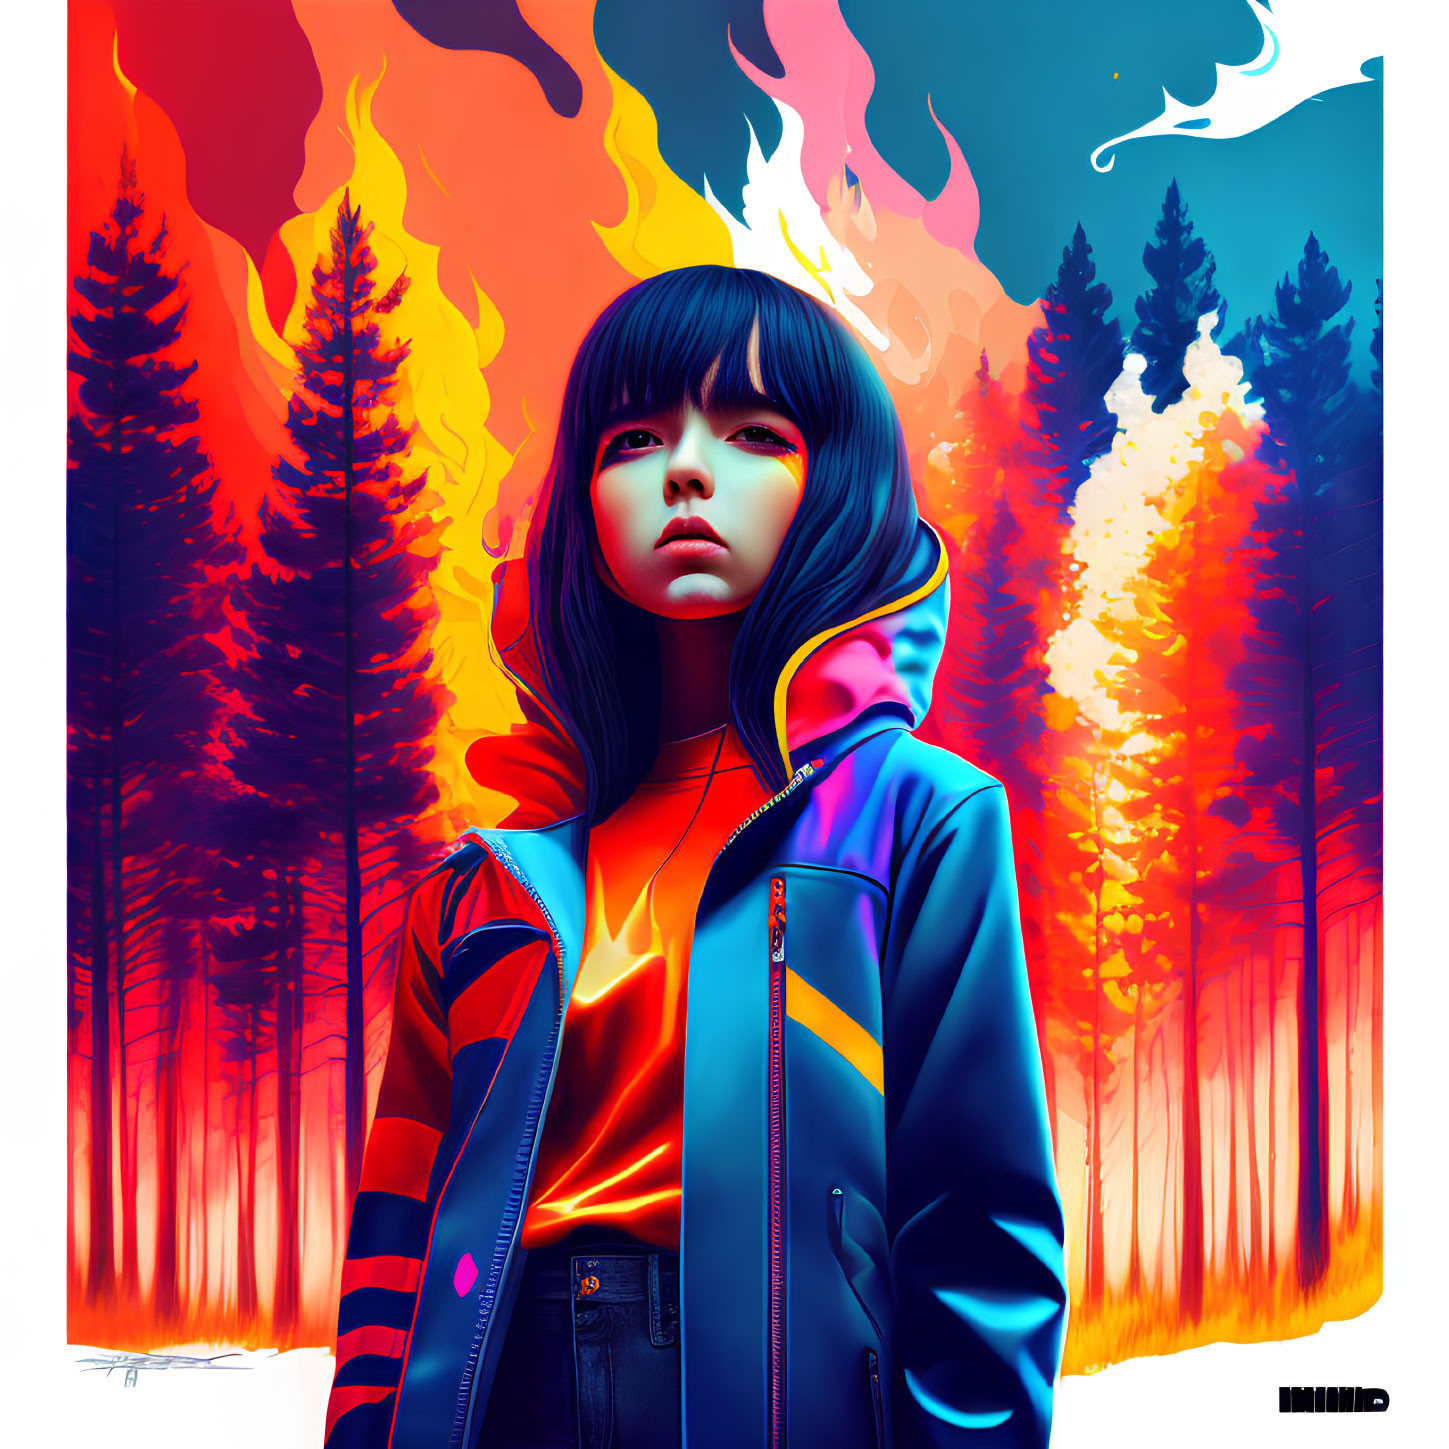 Digital Artwork: Girl in somber expression with colorful forest fire background